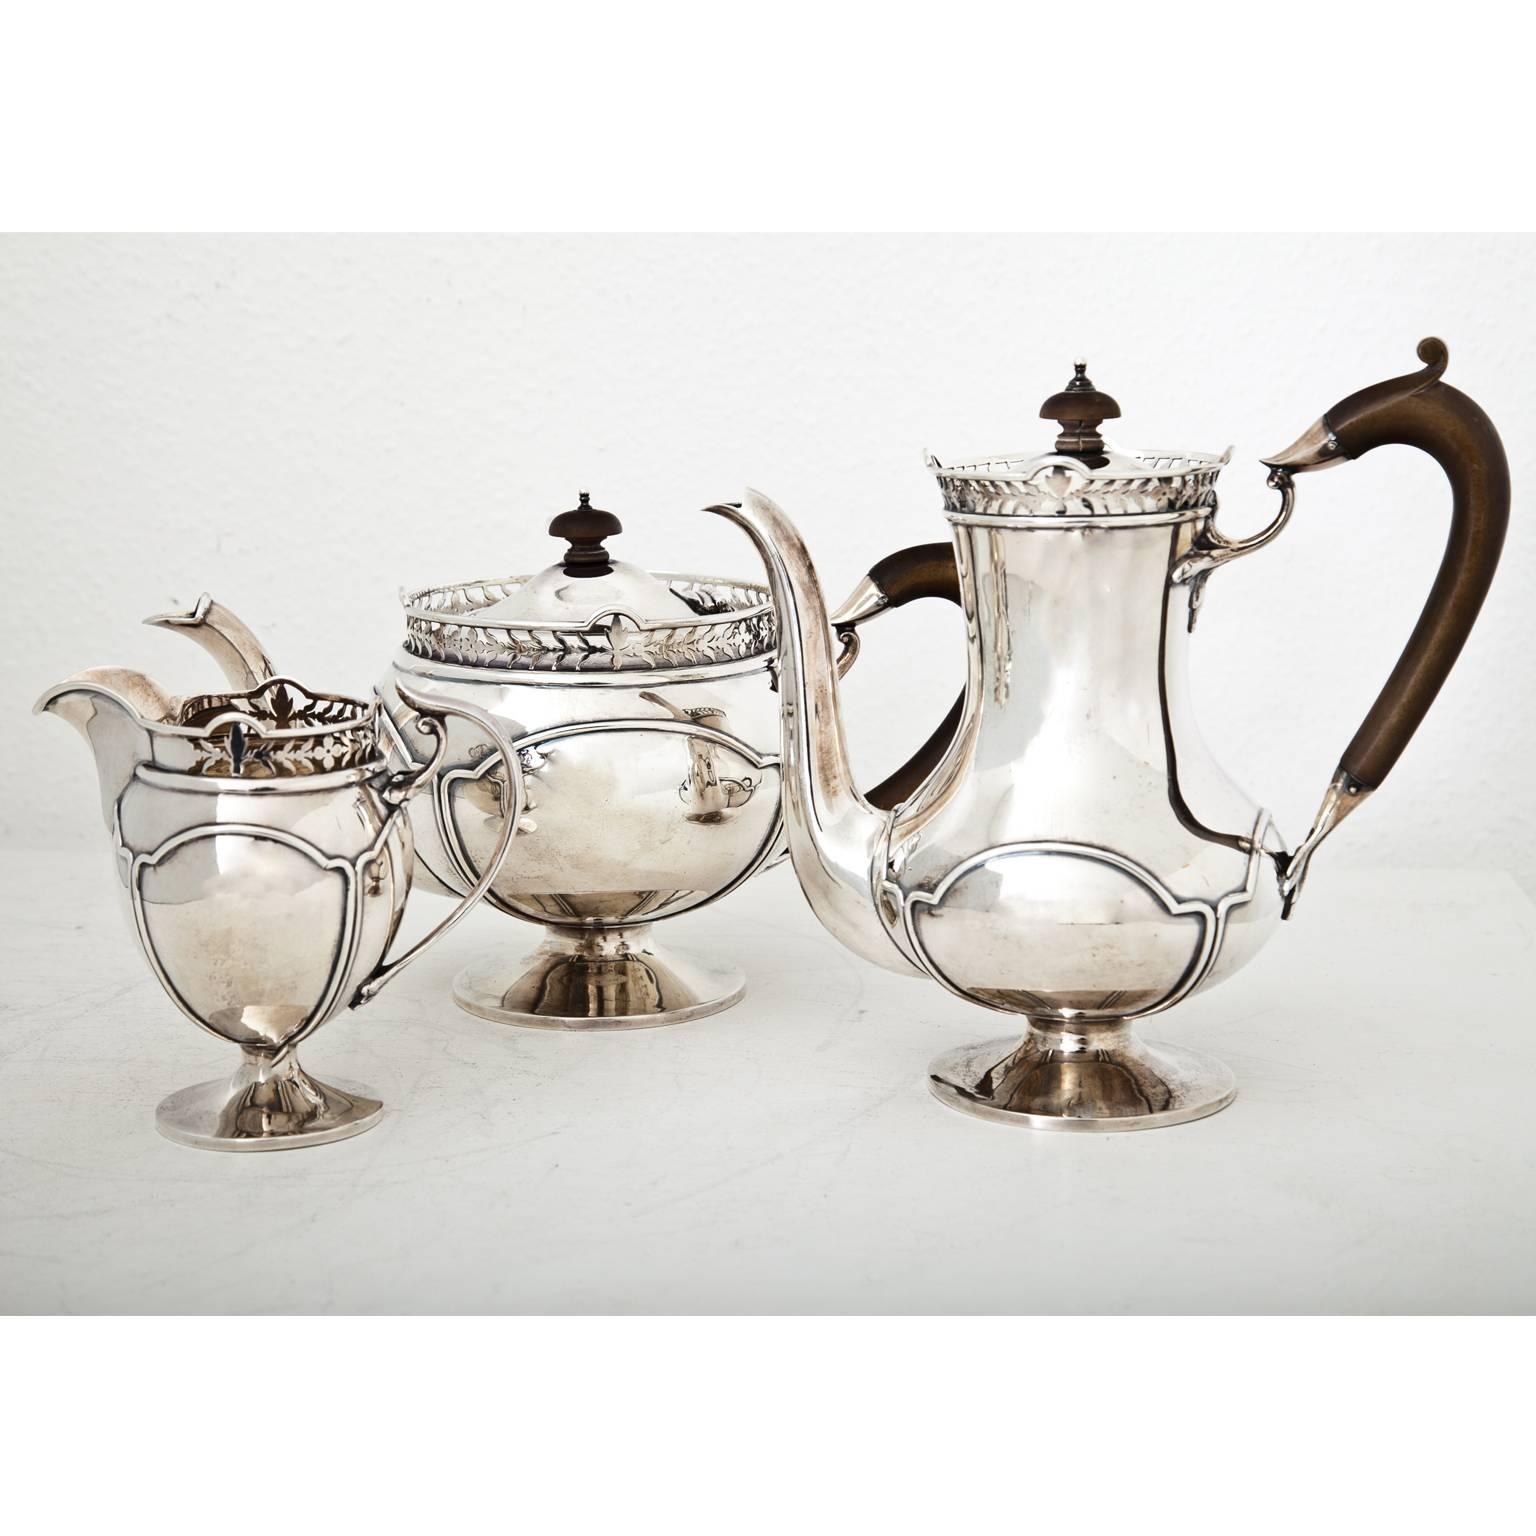 Three piece coffee and tea set by Fattorini Bradford out of silver (total weight: 1562 gr), consisting of one tea and one coffeepot and one milk jug. Embossed at the bottom.
Measures: Coffee pot: 21 x 23 x 12 cm
Tea pot: 17 x 27 x 16 cm
Milk jug: